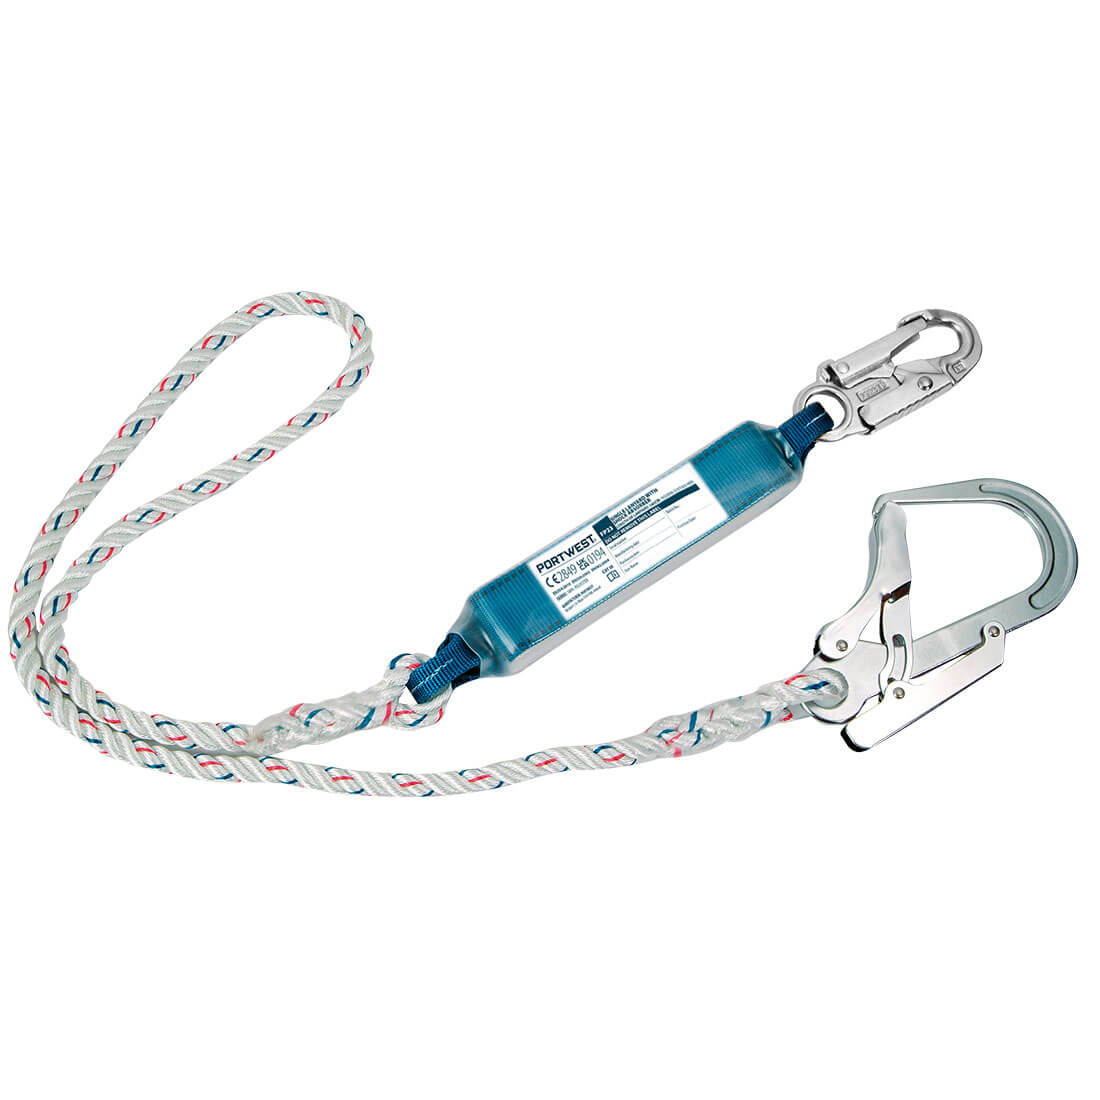 Single Lanyard With Shock Absorber - 1.8m